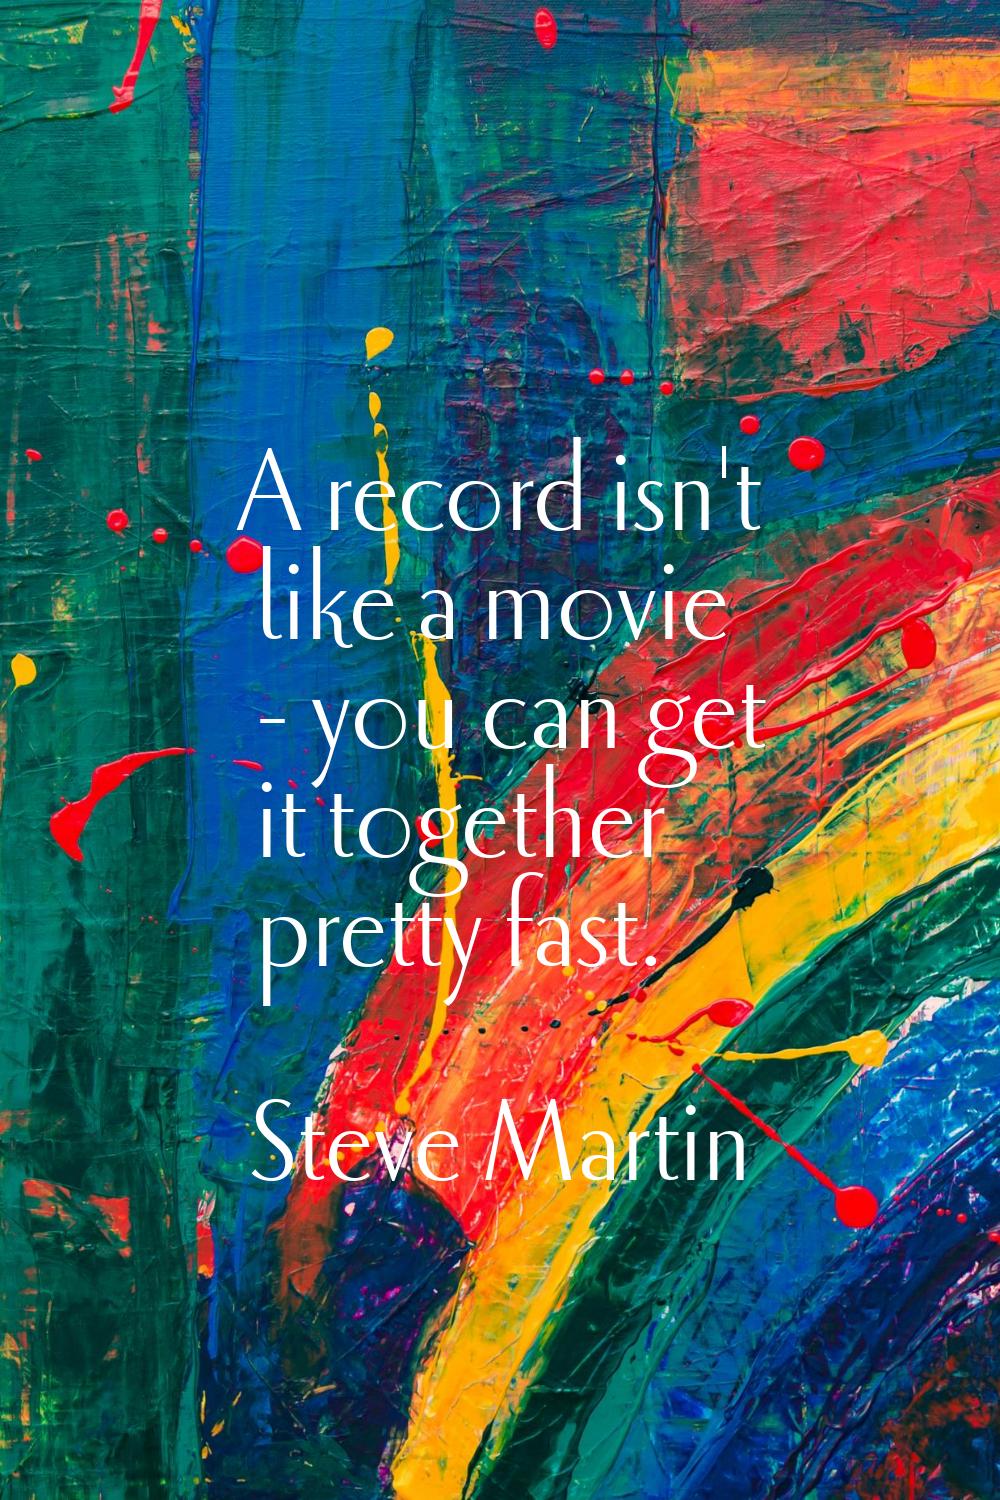 A record isn't like a movie - you can get it together pretty fast.